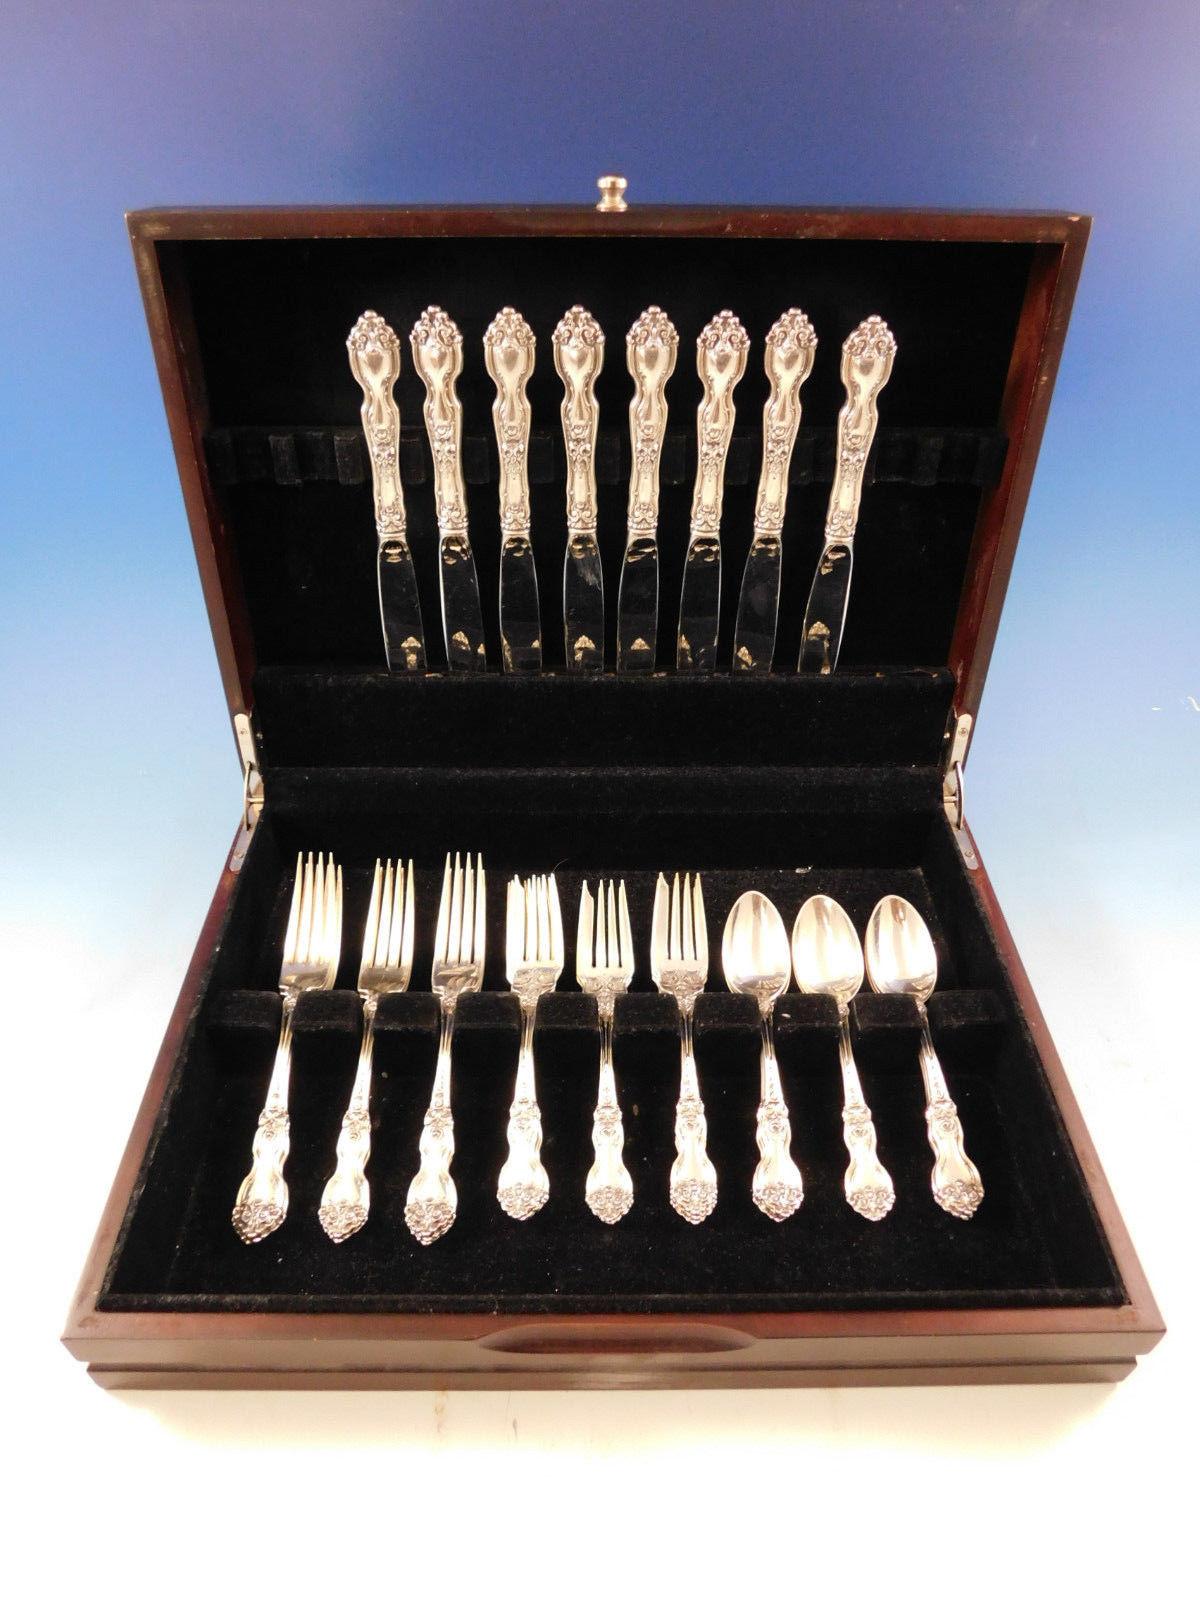 Heirloom quality La Reine by Wallace sterling silver Flatware set, 32 pieces. This set includes:

8 knives, 9